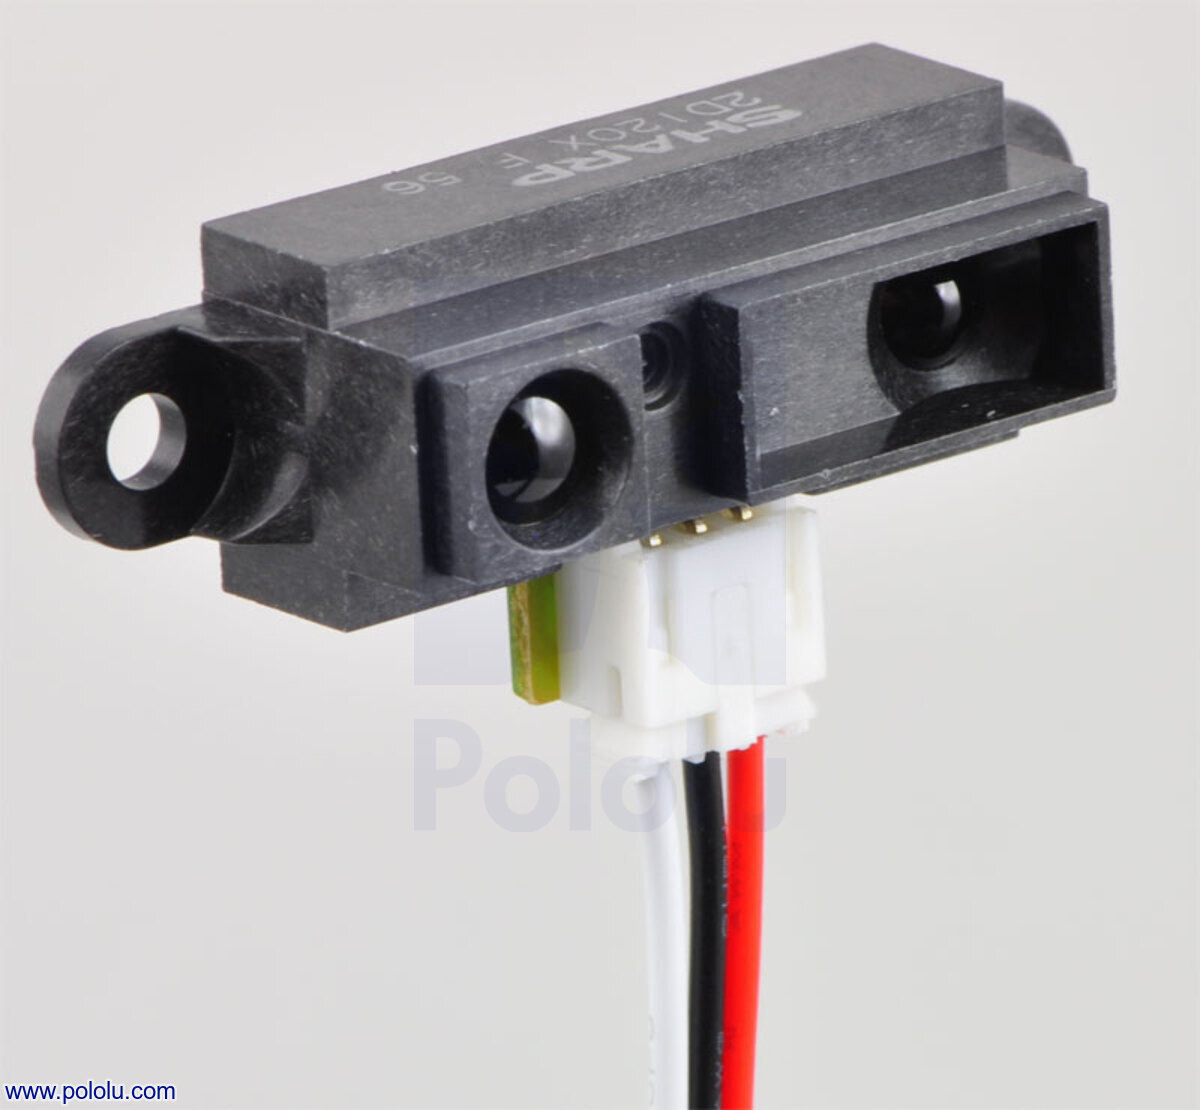 for Sharp GP2Y0A51 Distance Sensor PO2411 30cm Pololu 3Pin Female JST ZH Cable 